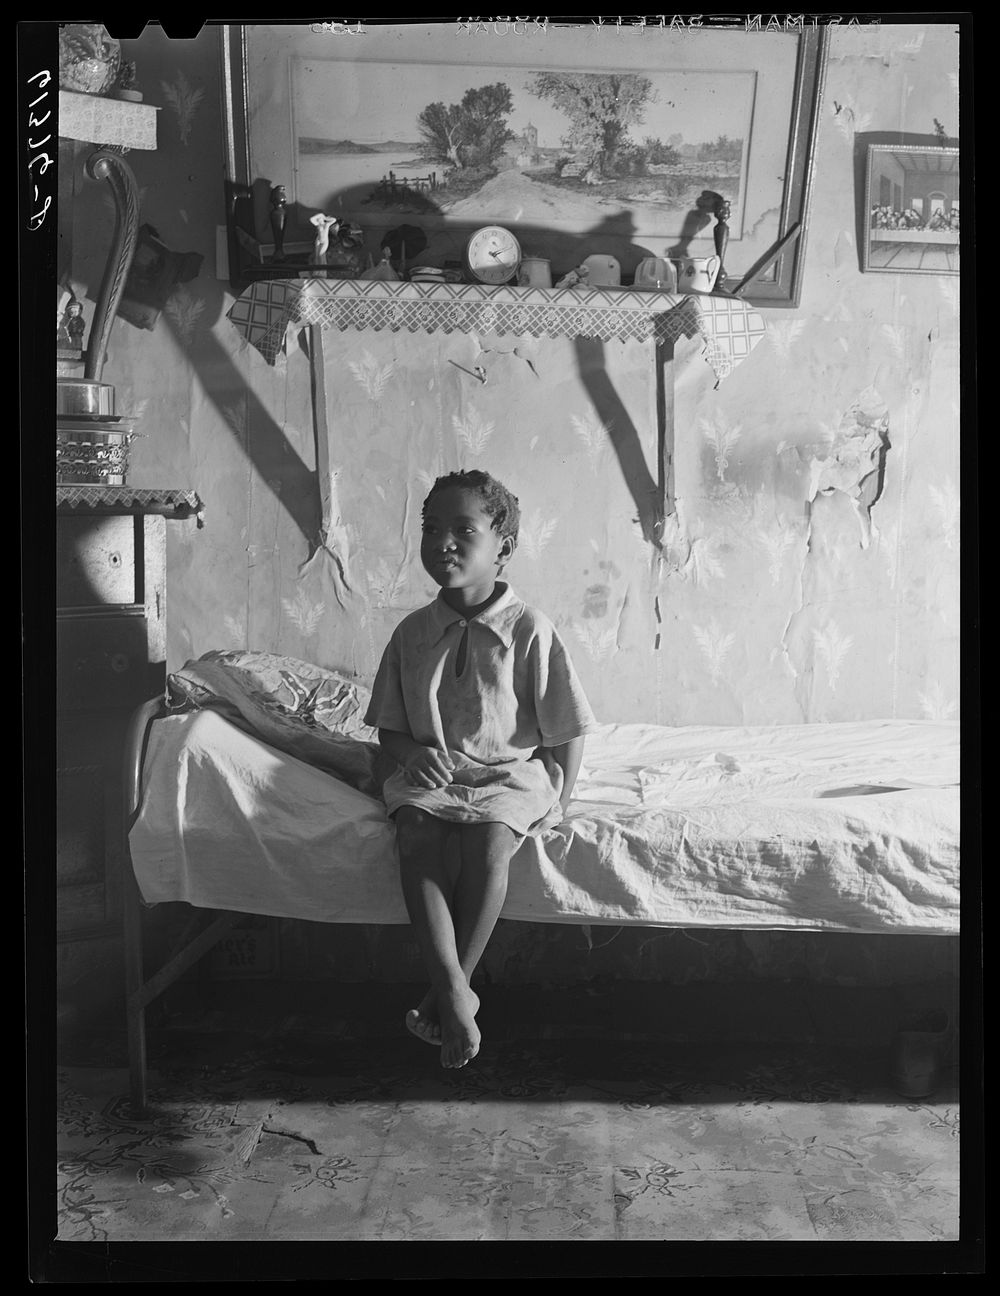 Daughter of Calip White, FSA (Farm Security Administration) borrower, near Scotland, Maryland, Saint Mary's County. Sourced…